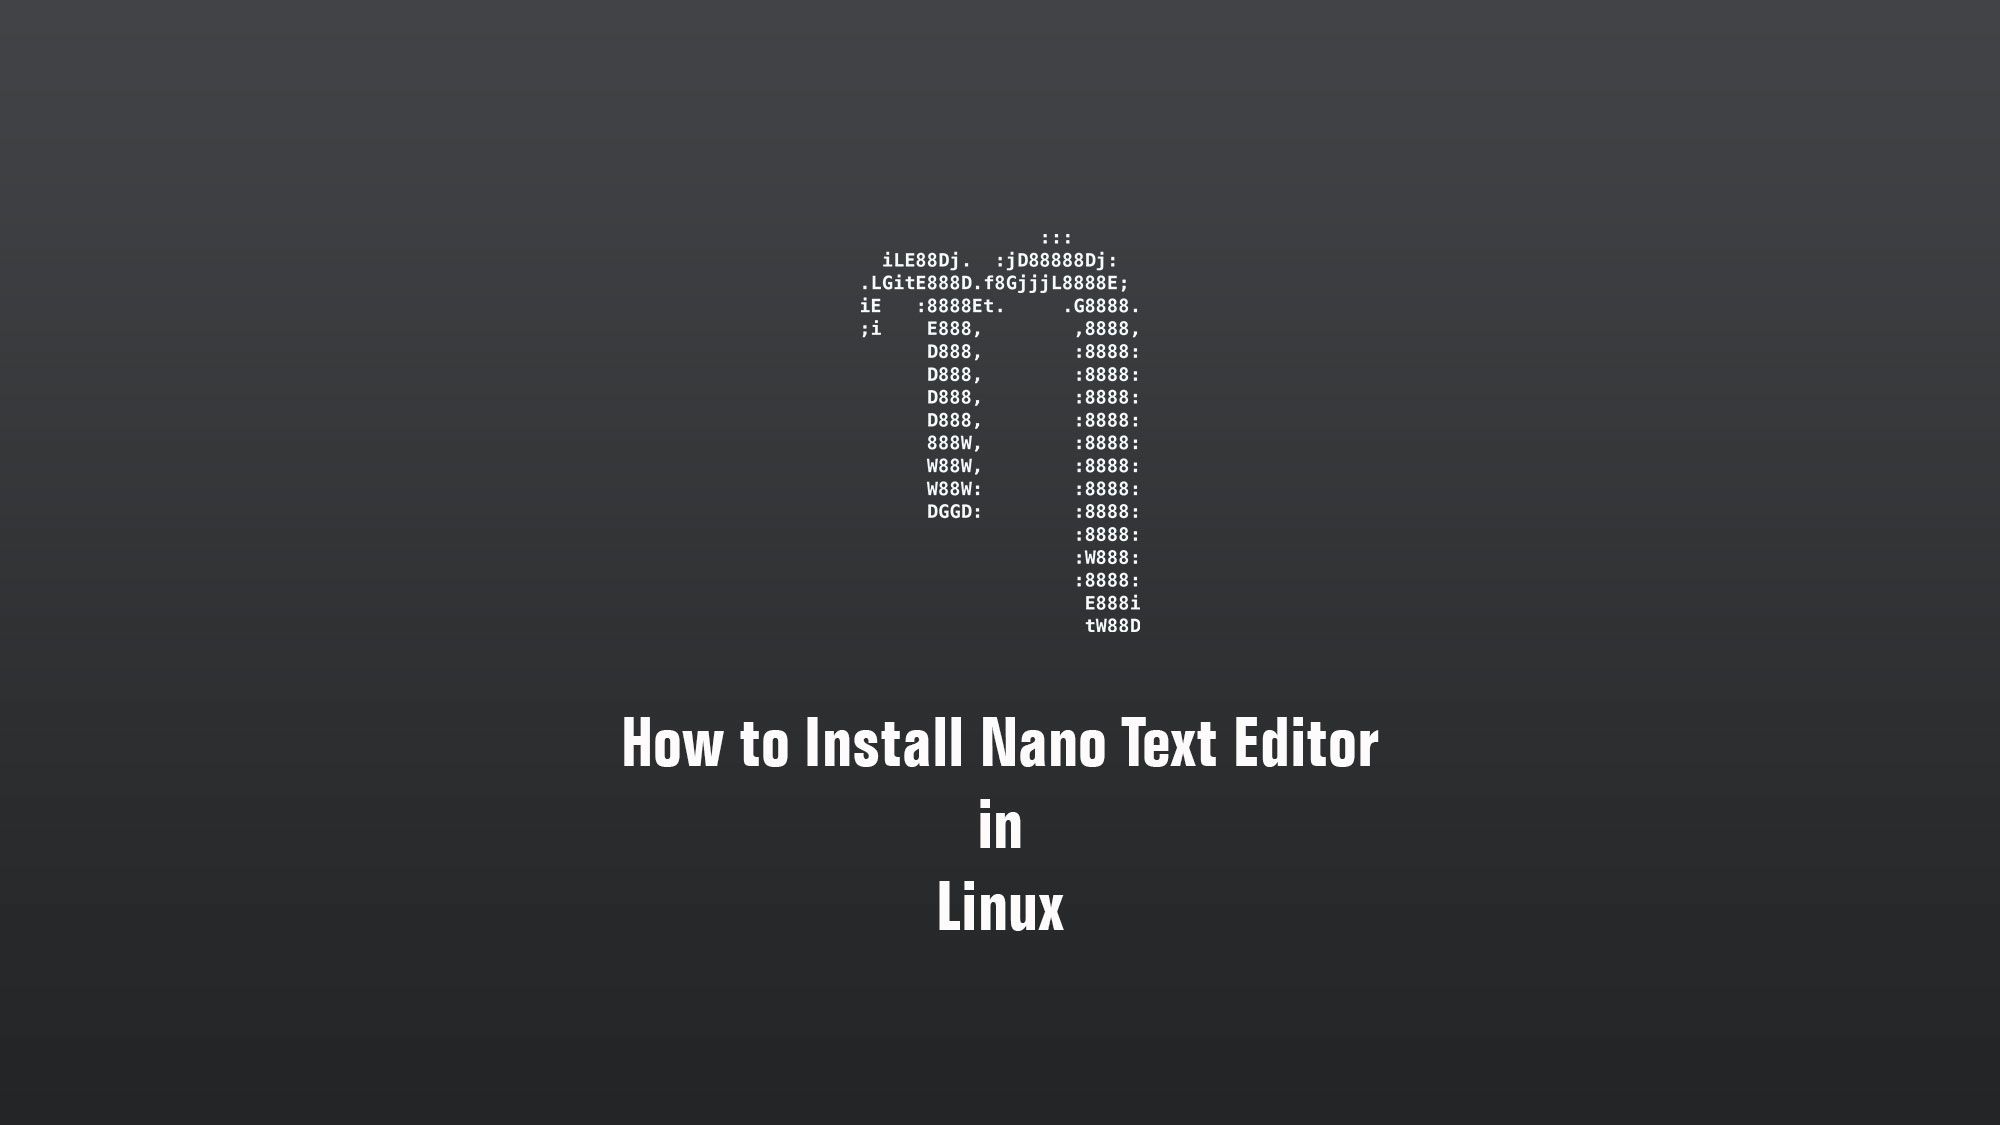 Install Nano Text Editor in Linux